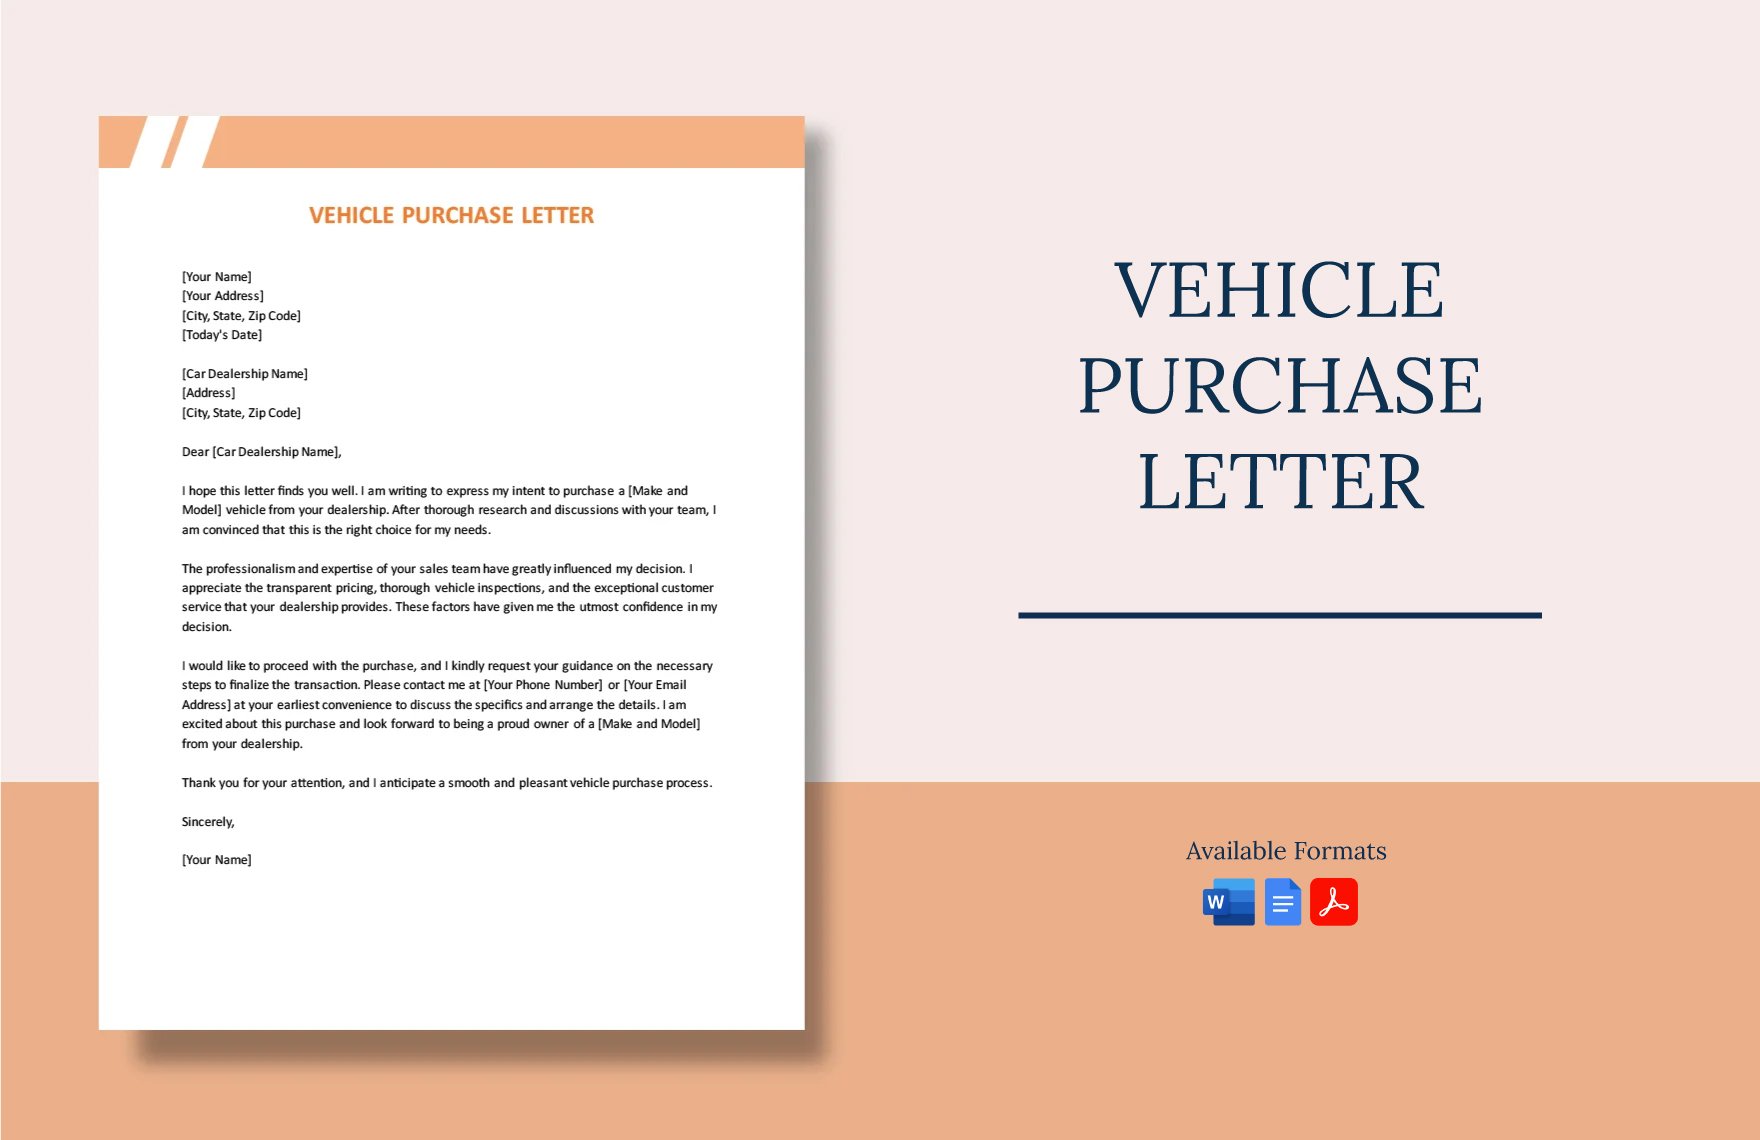 Vehicle Purchase Letter